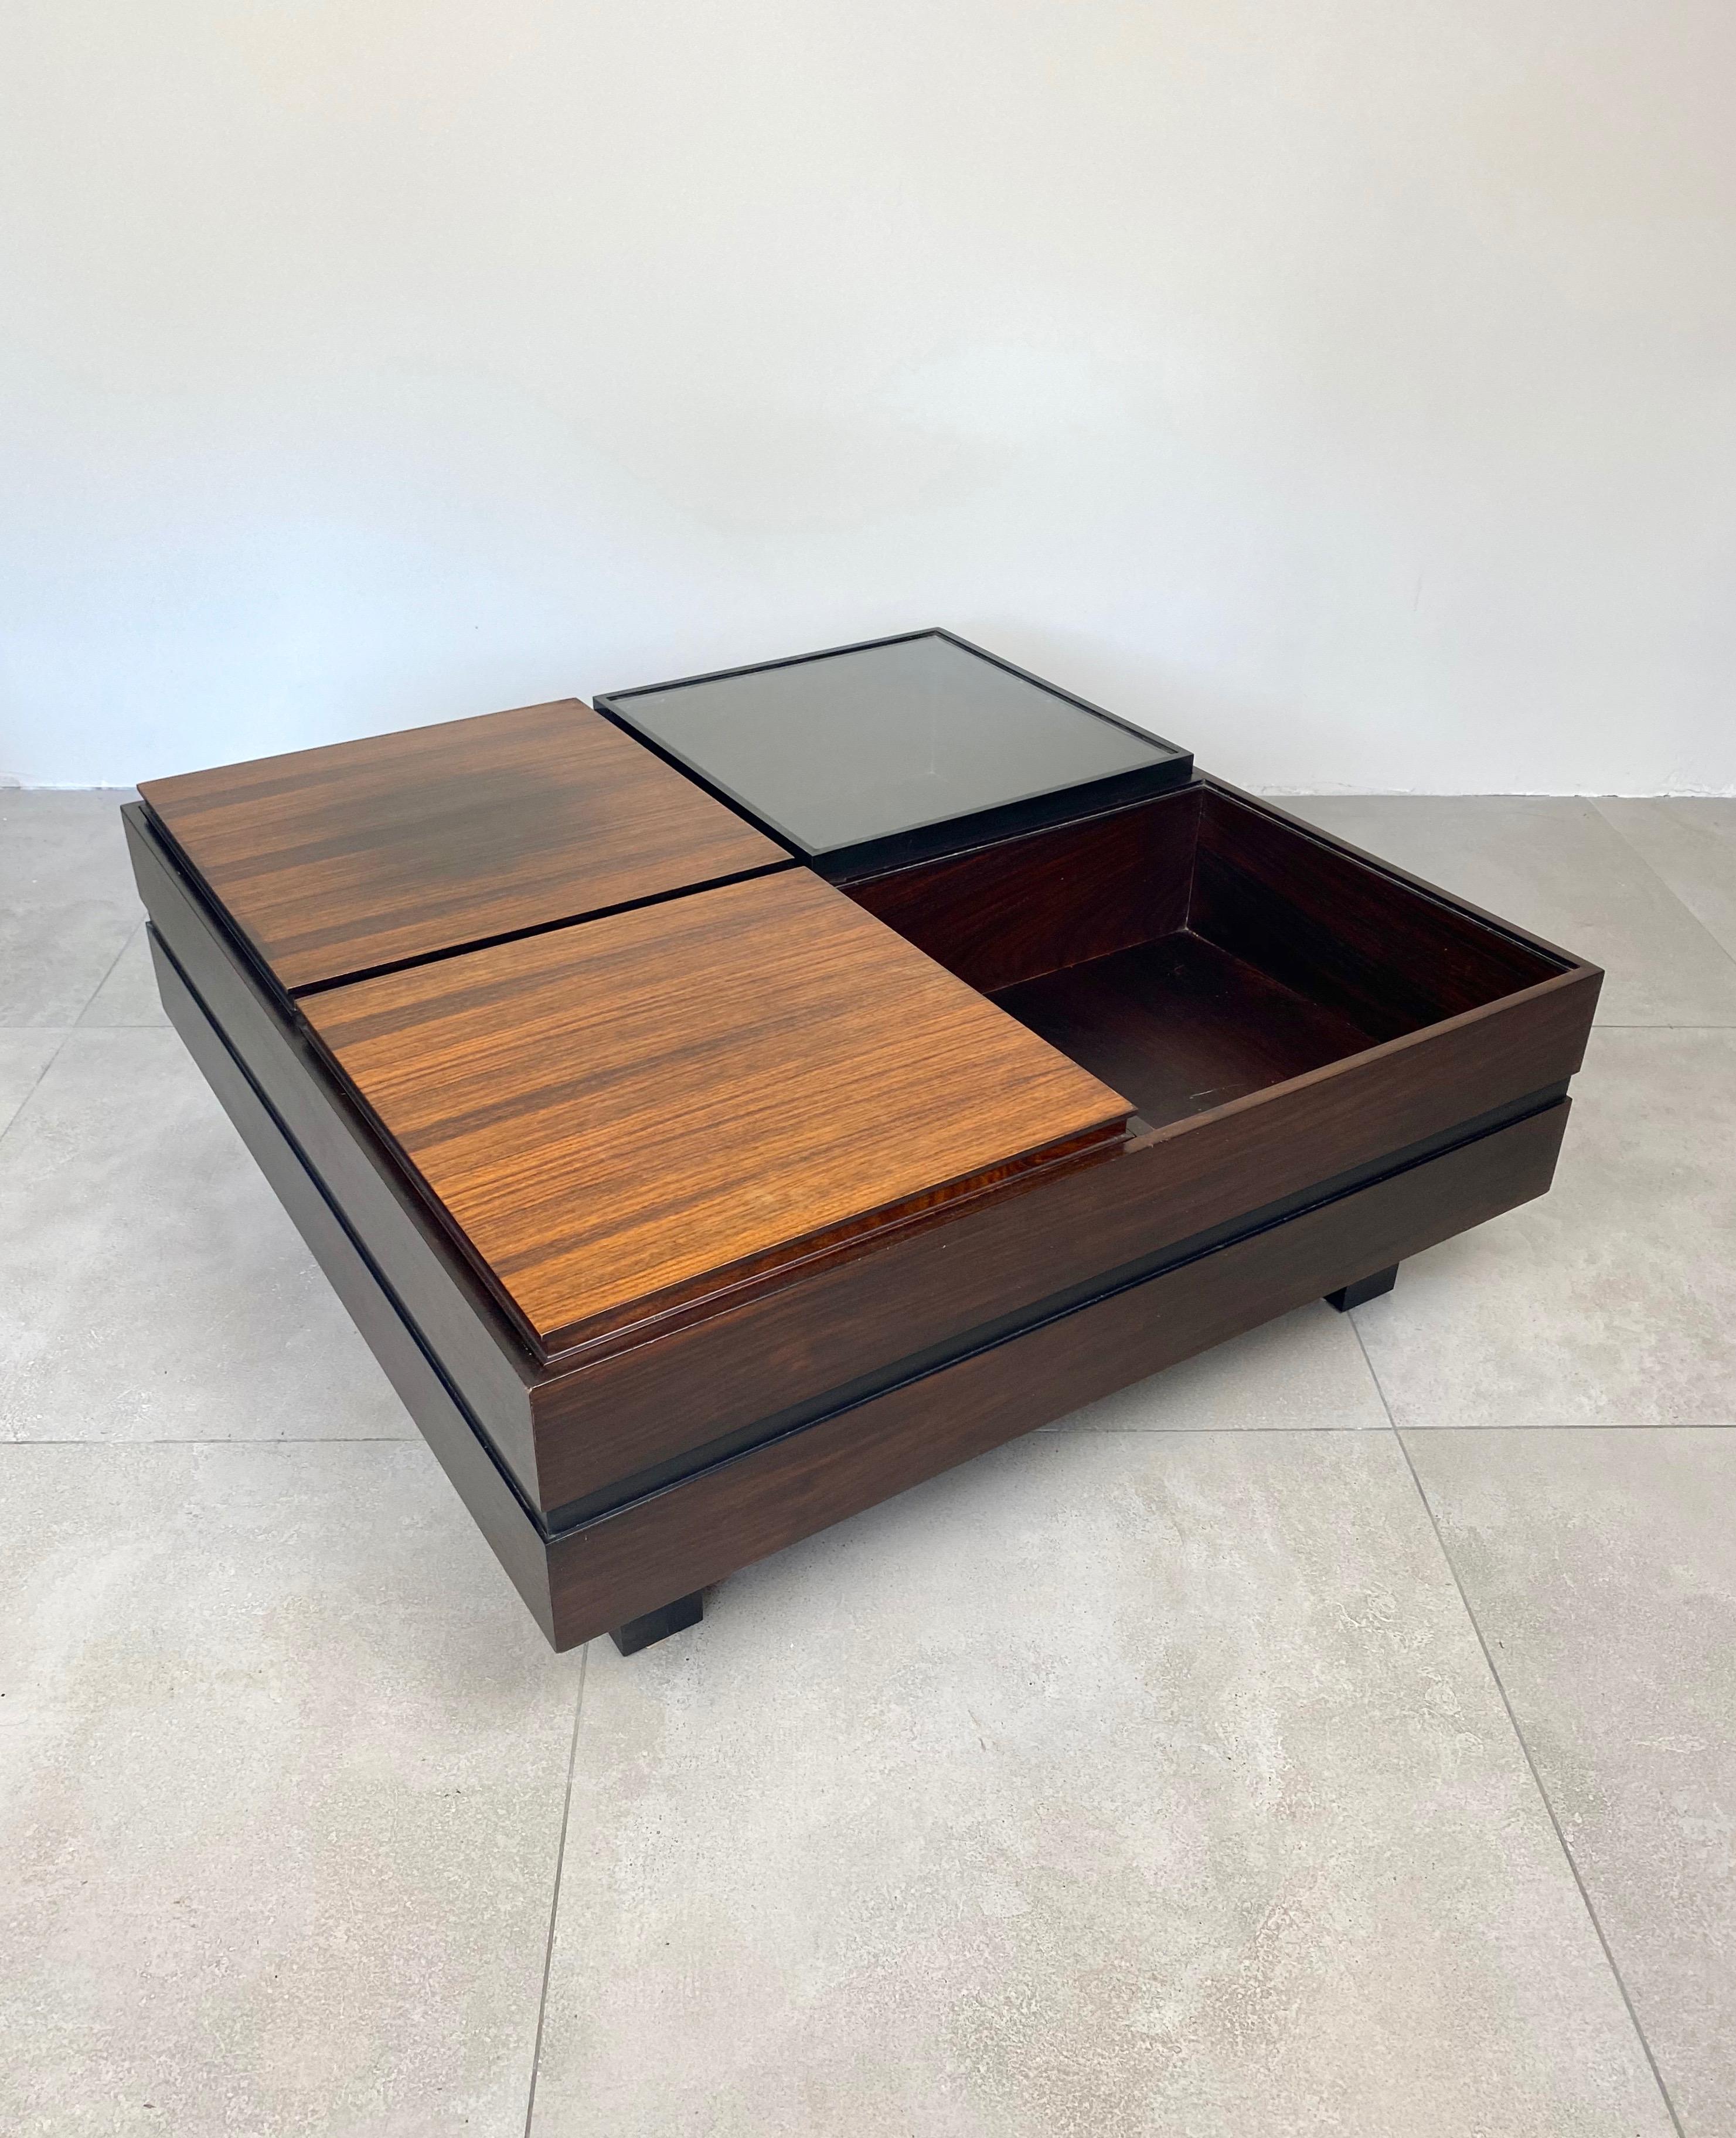 This modular coffee table produced by Luigi Sormani in the 1960s is divided into four compartments; one empty, another a removable tray, the last a glass lid. The sides are divided horizontally in half by a darker band, which lightens the profile of